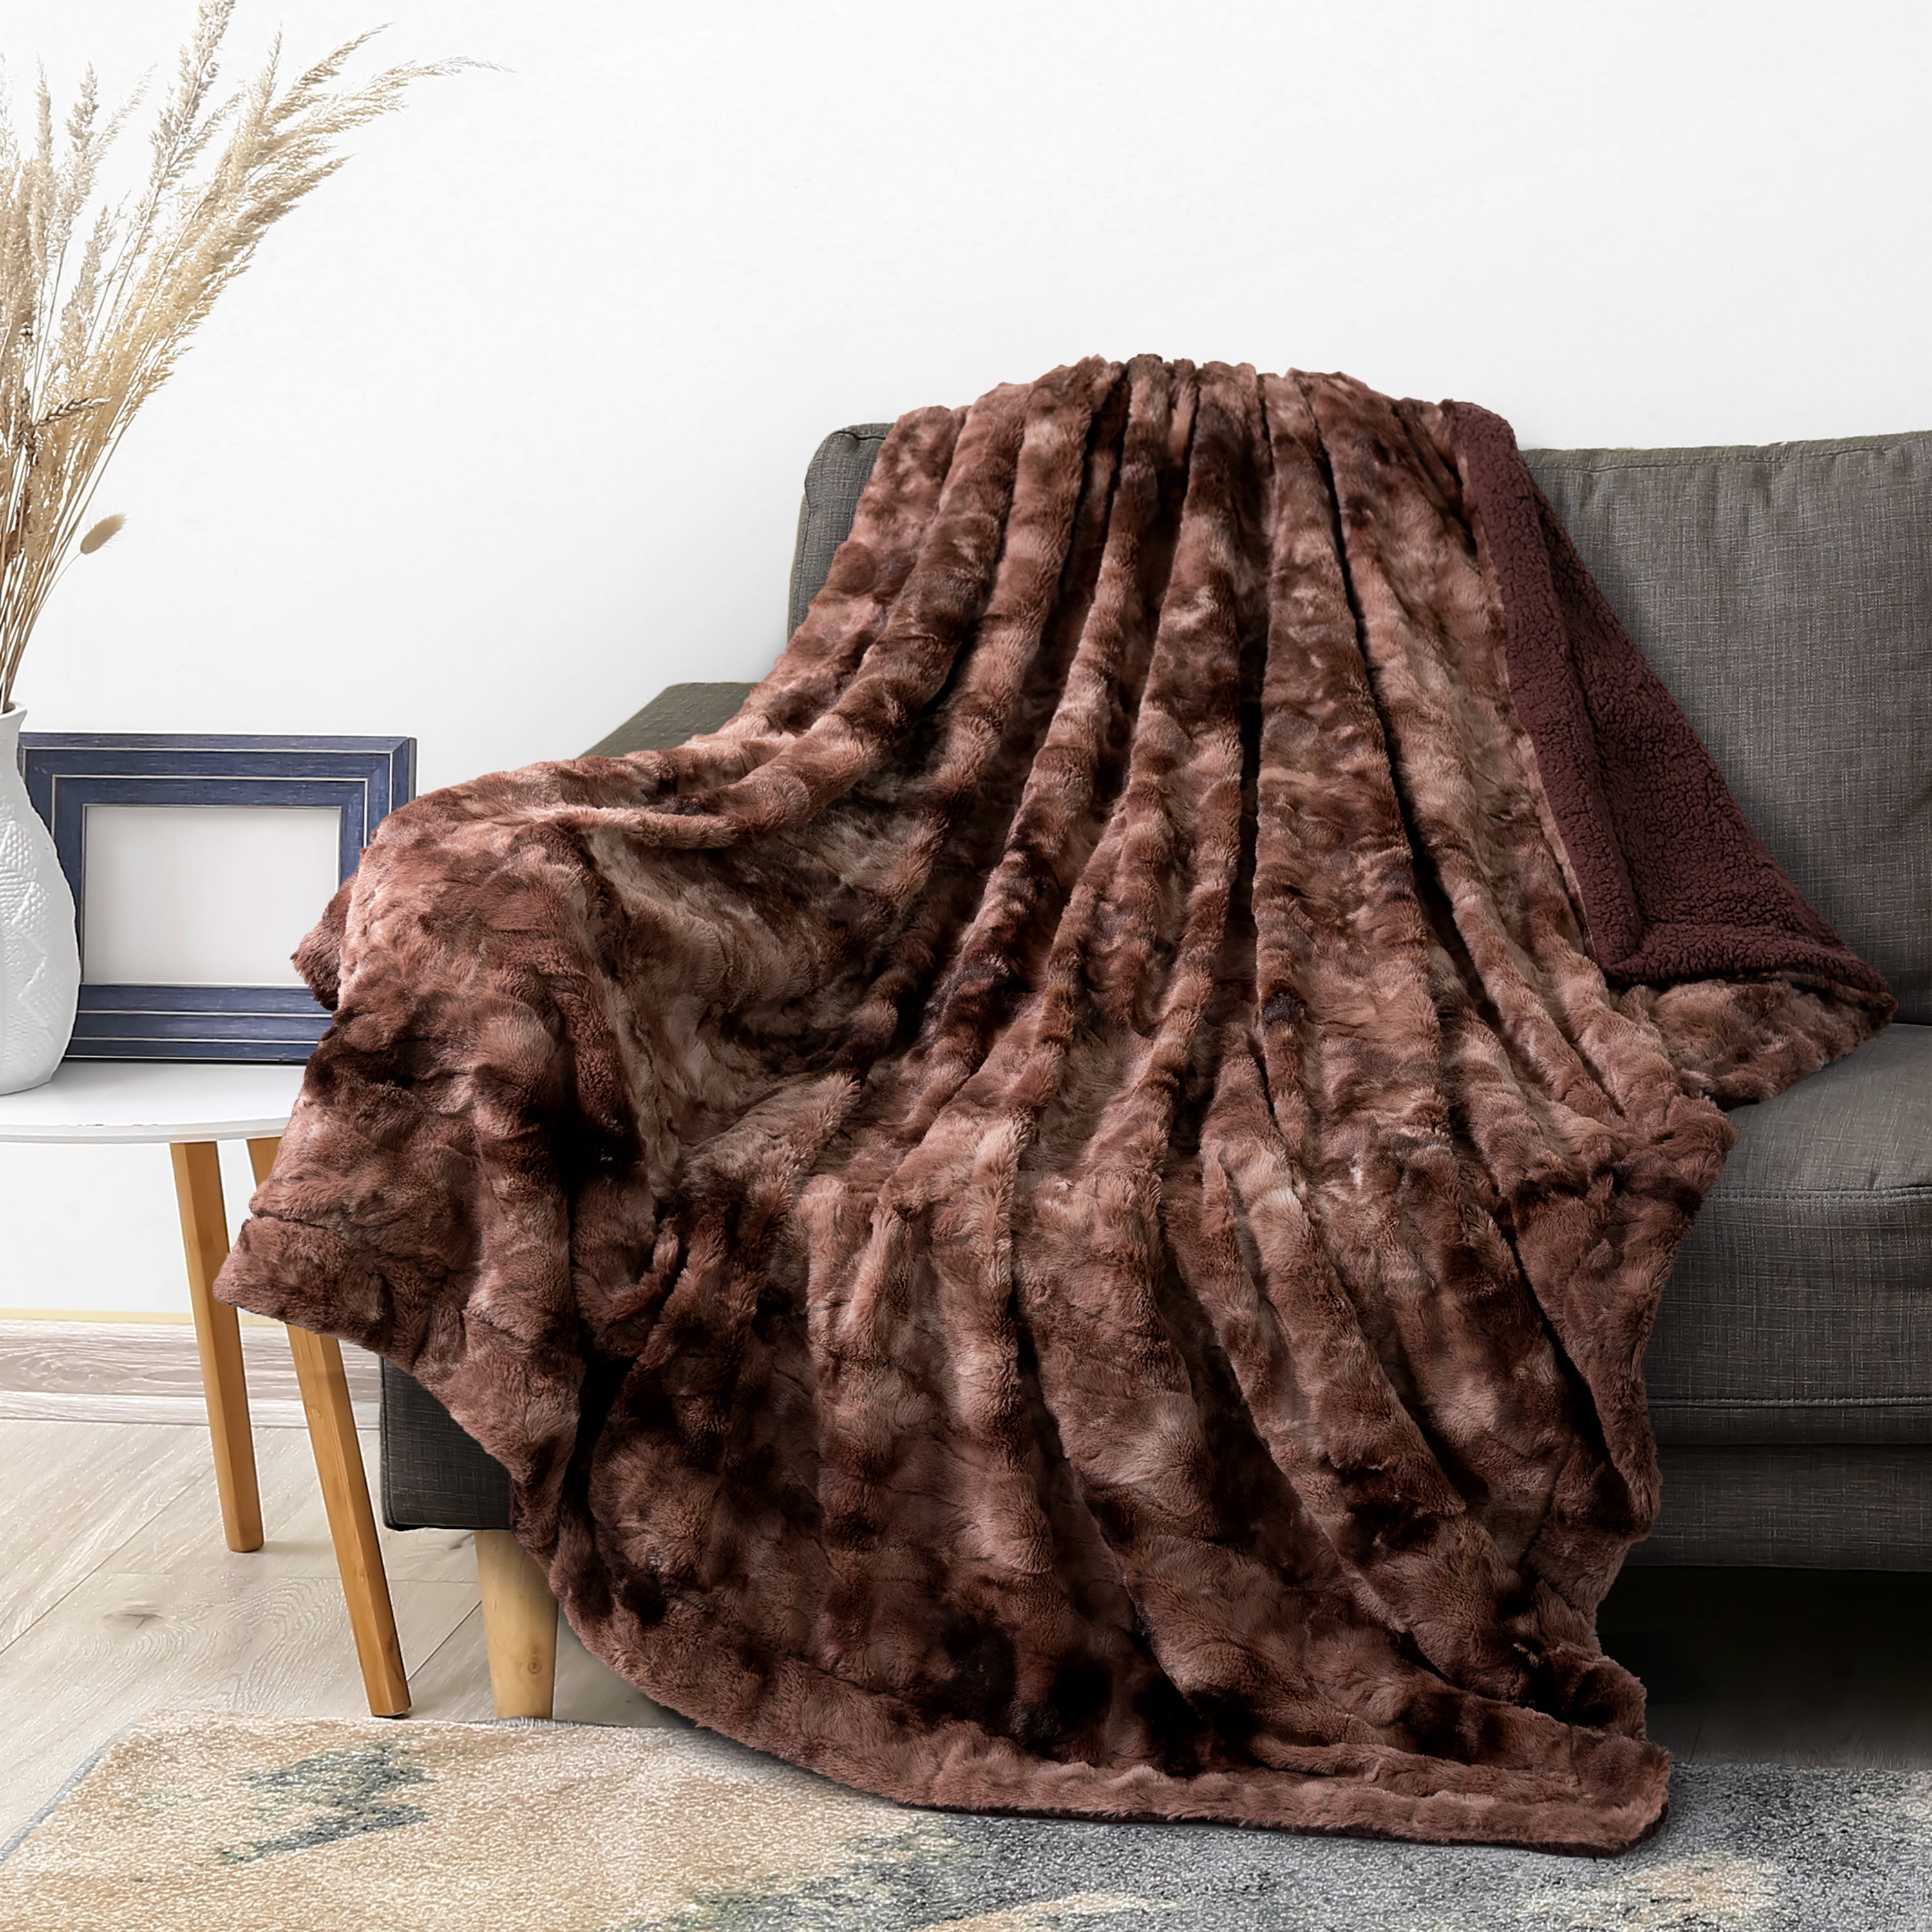 PAVILIA Faux Fur Throw Blanket Twin Tie-Dye Brown, Soft Warm Sherpa Blankets  & Throws for Bed, Fluffy Plush Thick Fleece Throw Blanket for Couch Sofa,  Reversible Furry Shaggy Blanket, Brown 60x80 